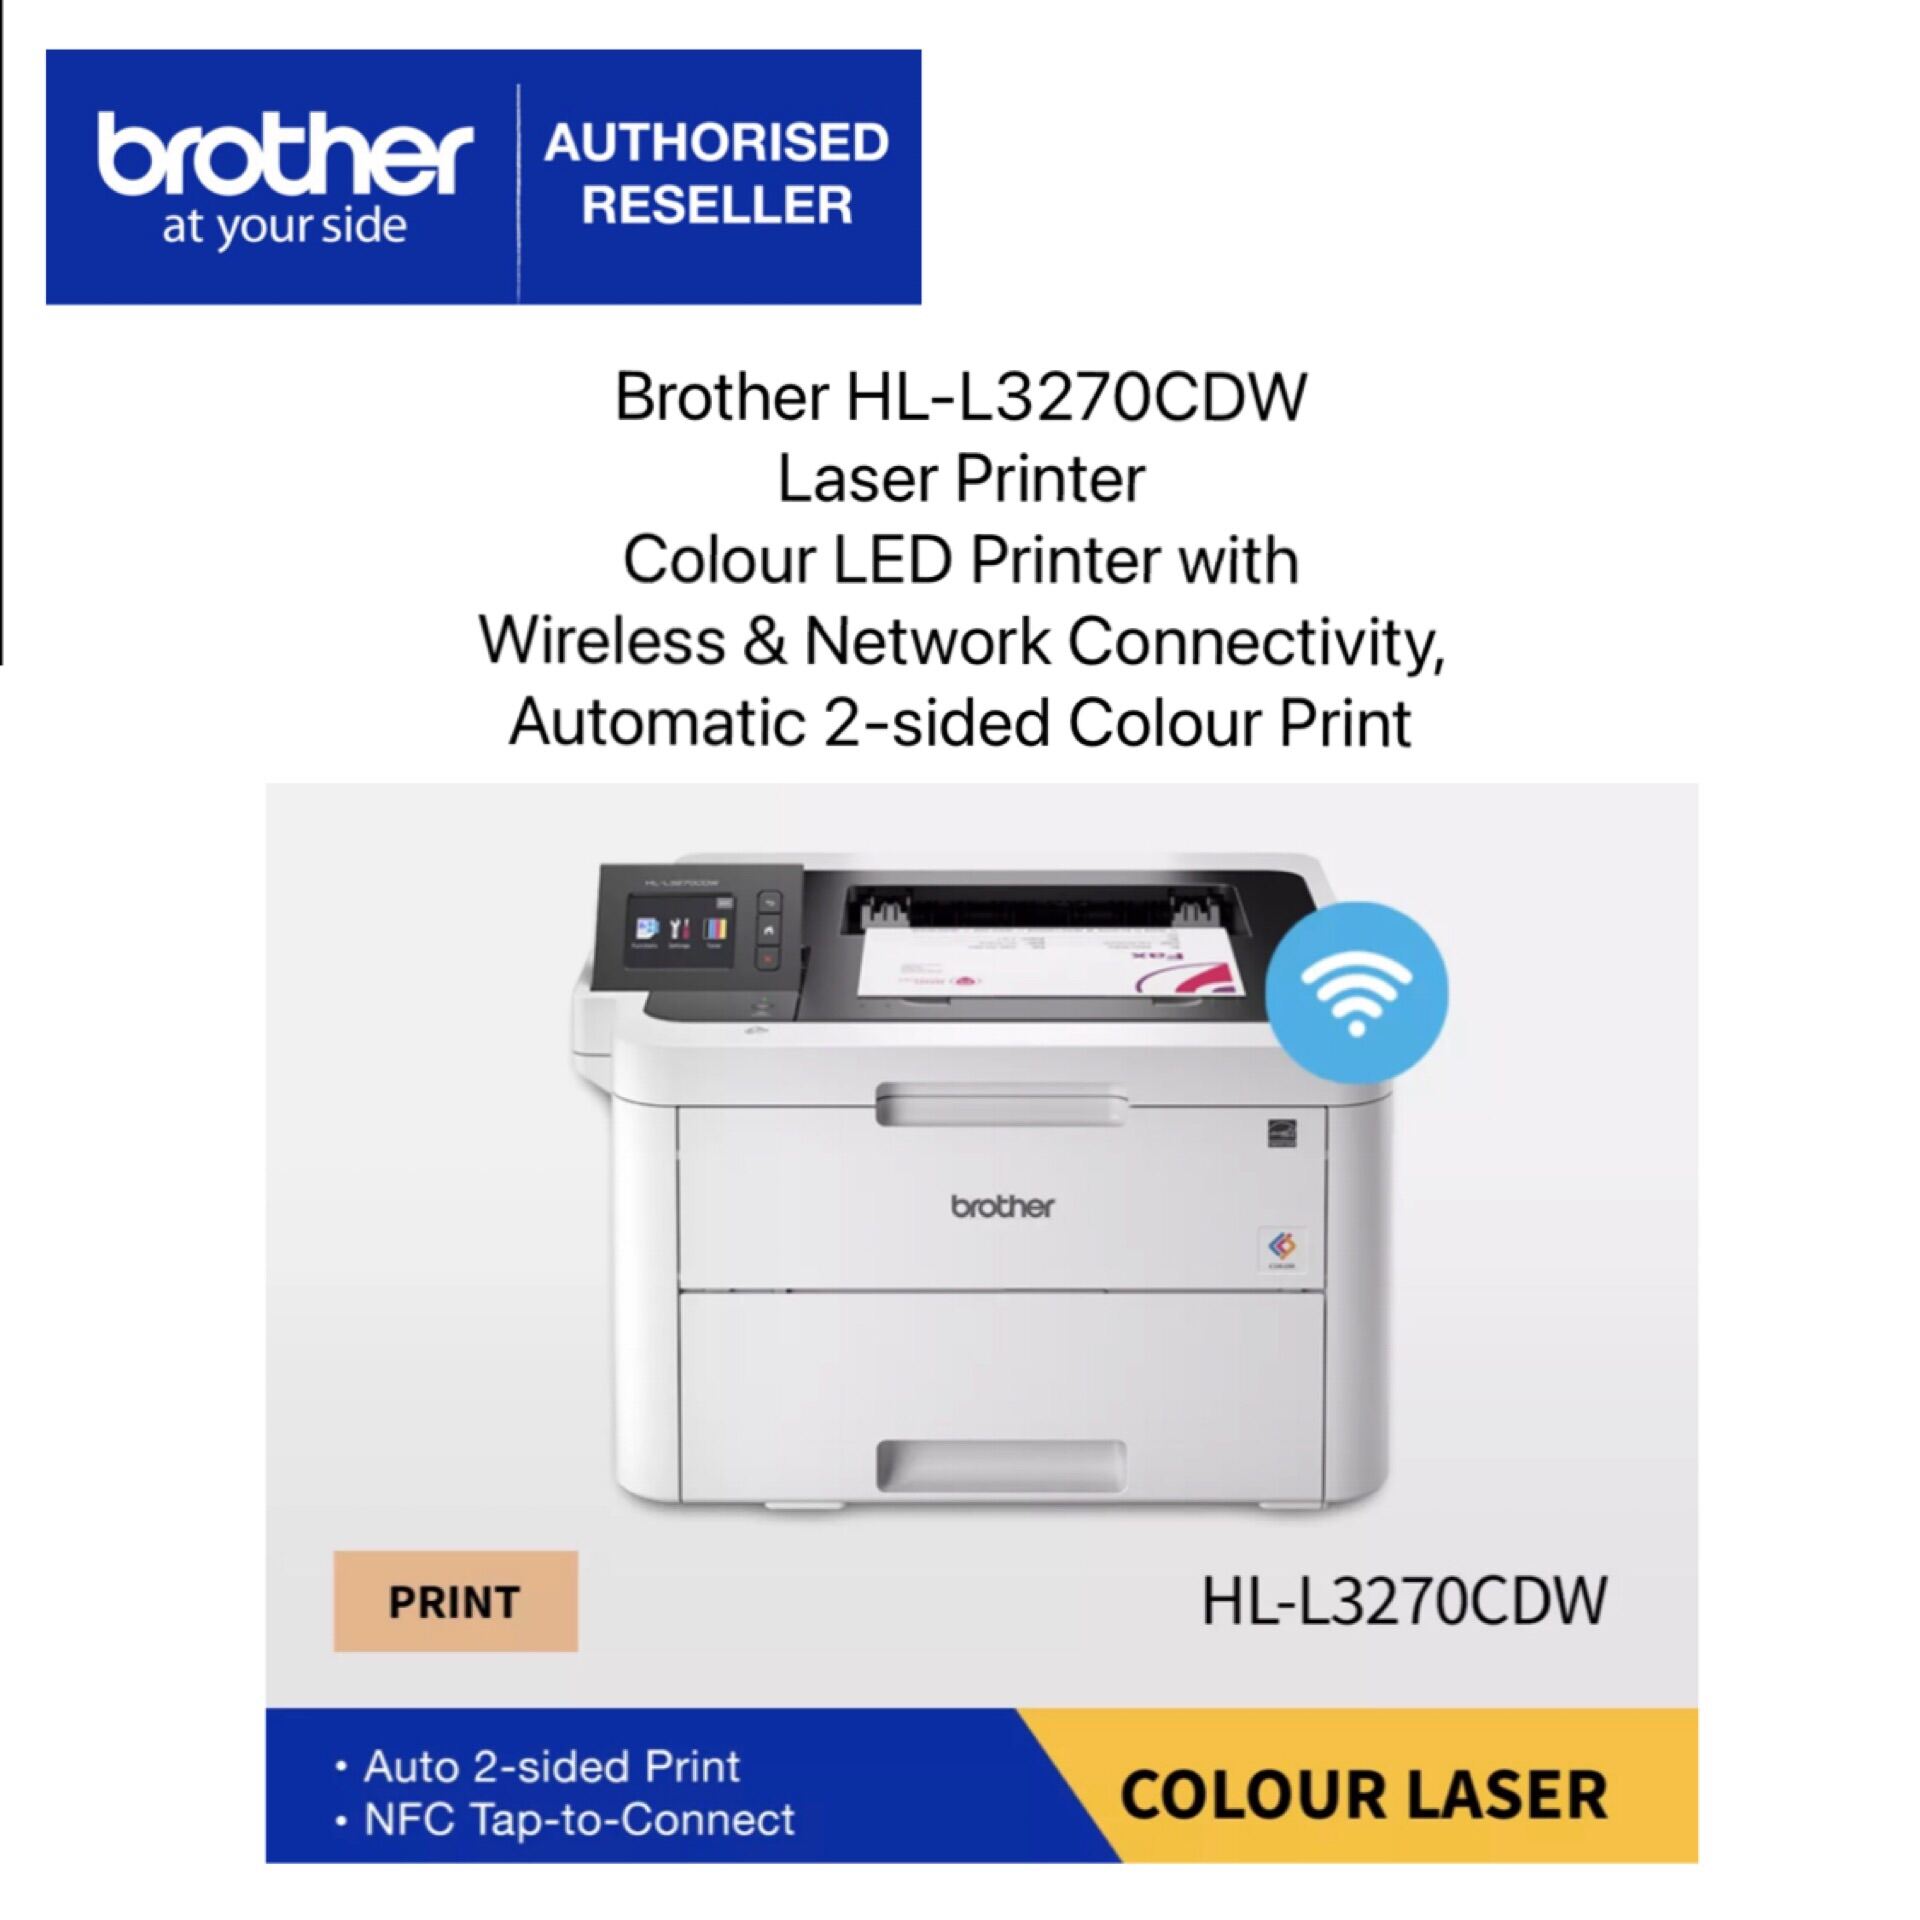 Brother HL-L3270CDW Laser Printer Colour LED Printer with Wireless & Network Connectivity, Automatic 2-sided Colour Print, Singapore